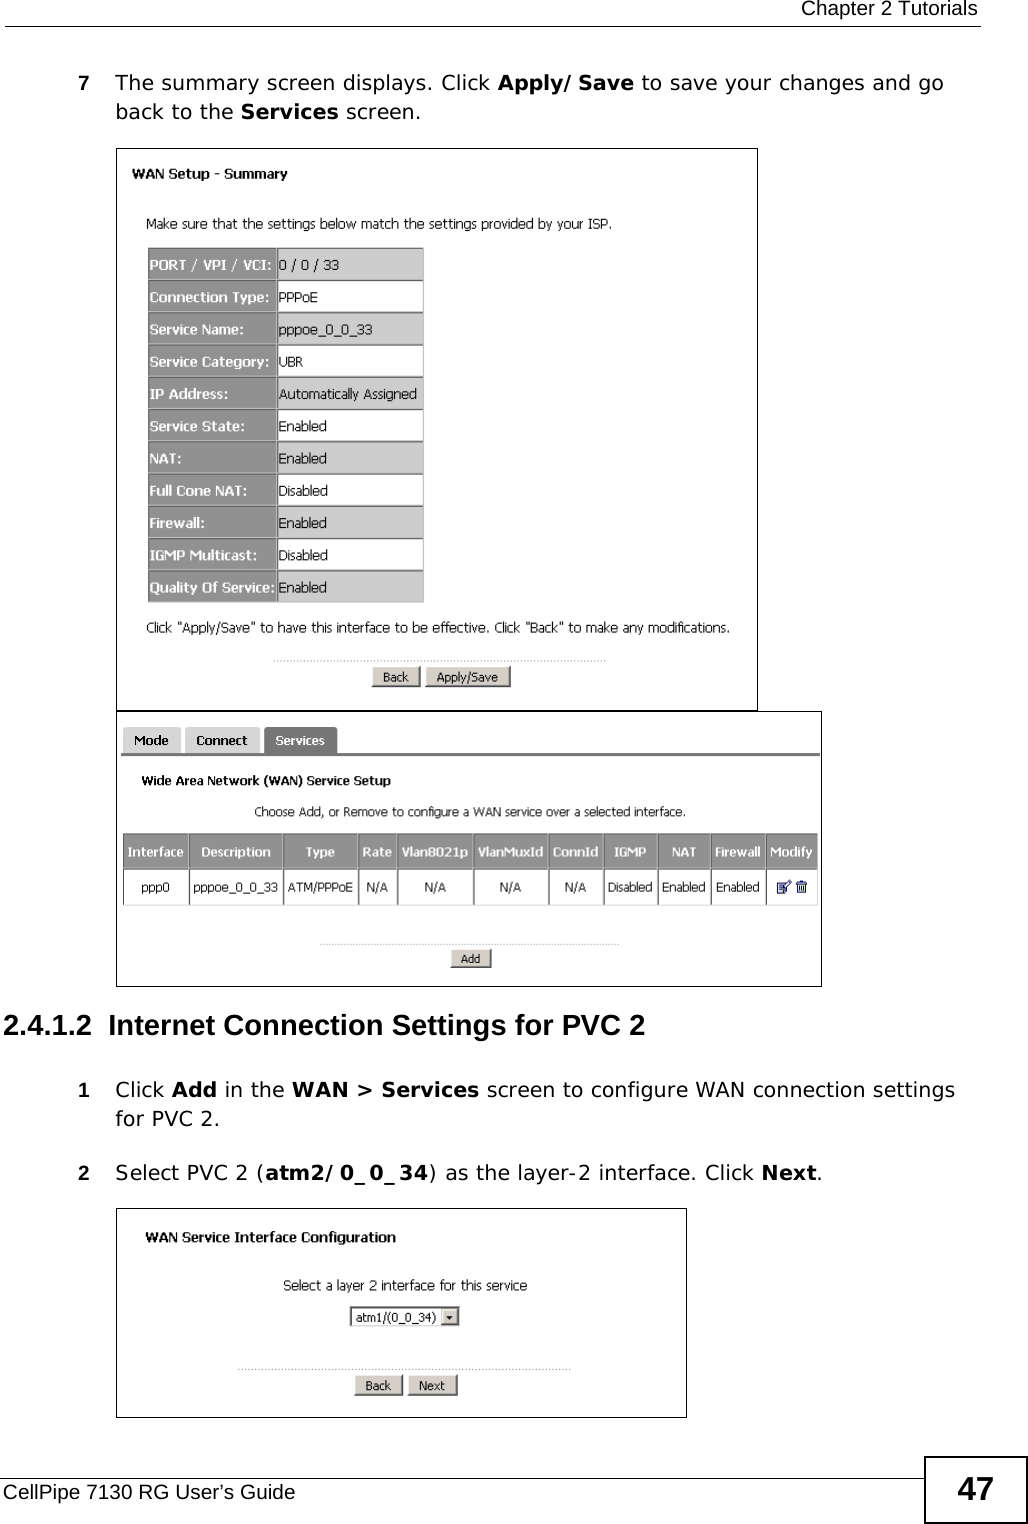  Chapter 2 TutorialsCellPipe 7130 RG User’s Guide 477The summary screen displays. Click Apply/Save to save your changes and go back to the Services screen.2.4.1.2  Internet Connection Settings for PVC 21Click Add in the WAN &gt; Services screen to configure WAN connection settings for PVC 2.2Select PVC 2 (atm2/0_0_34) as the layer-2 interface. Click Next.